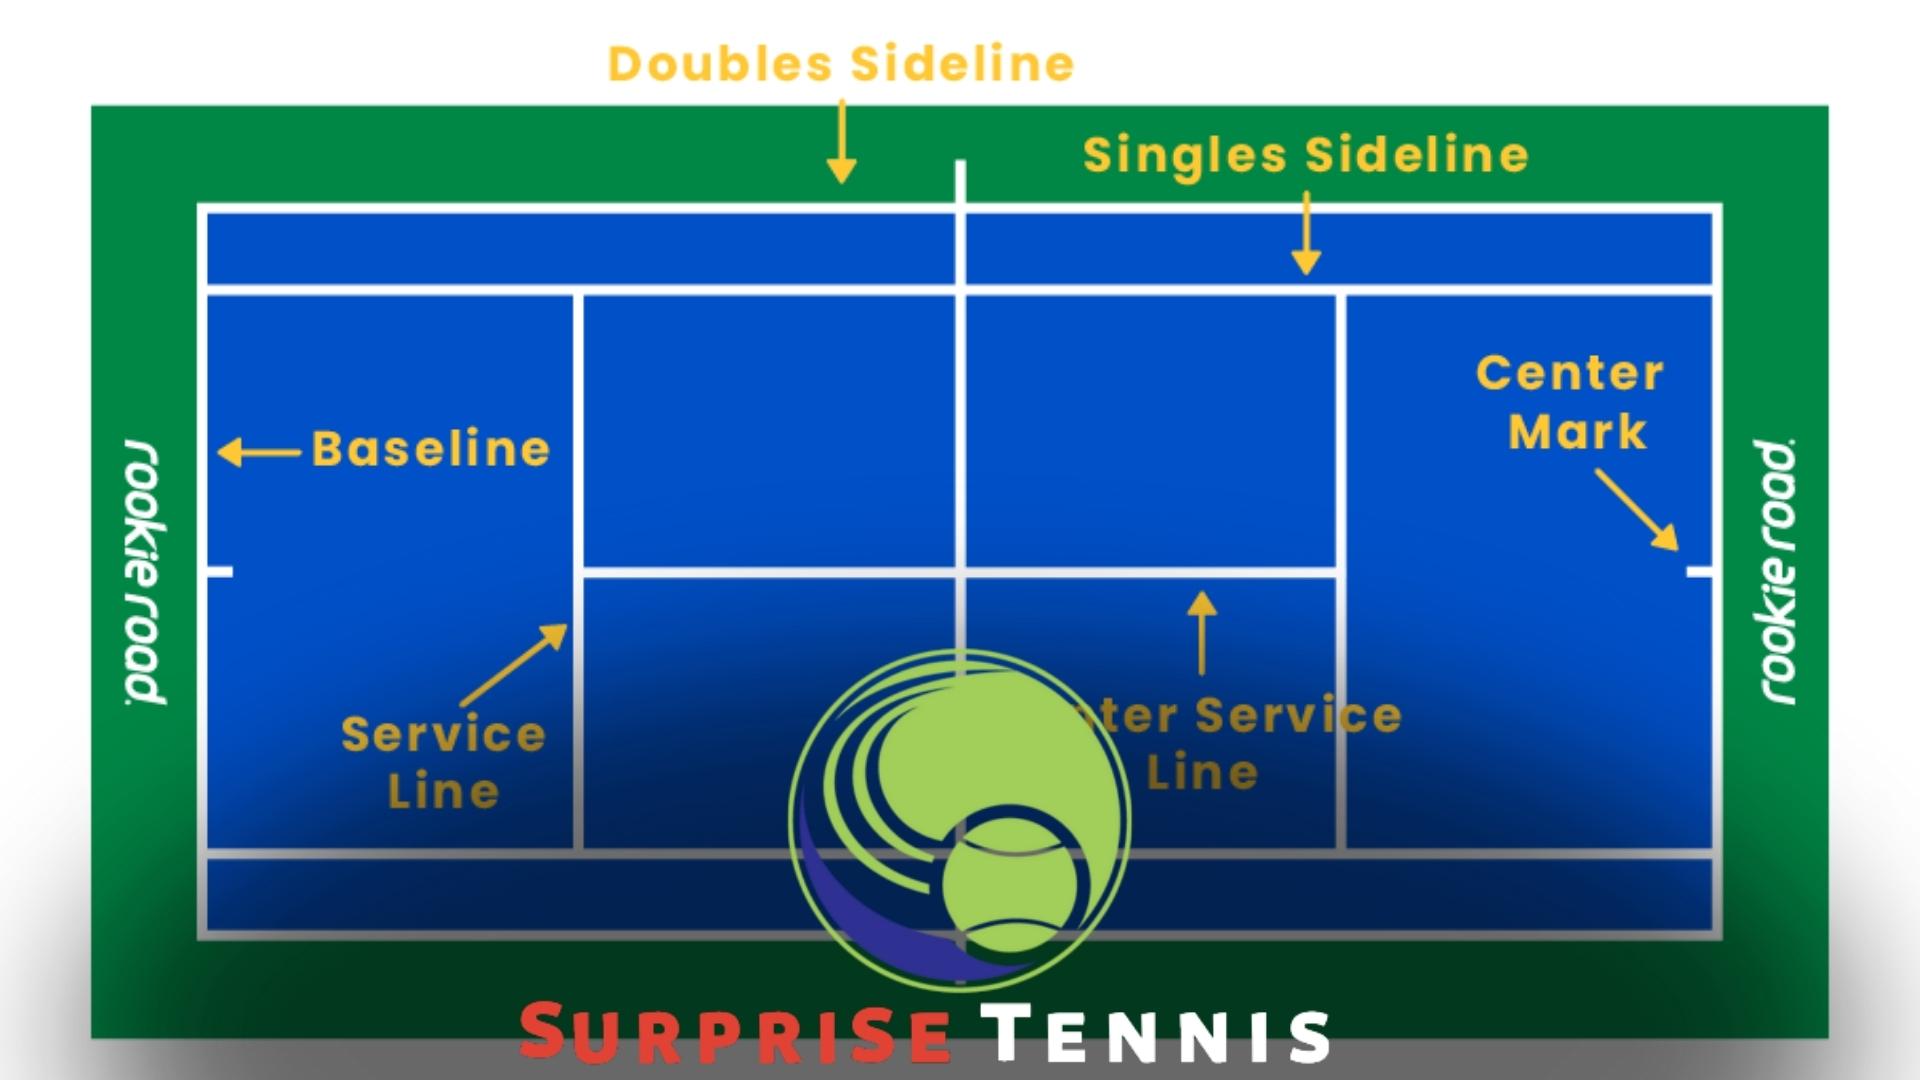 Tennis Court Line Names: How Many Exist and What Are They?